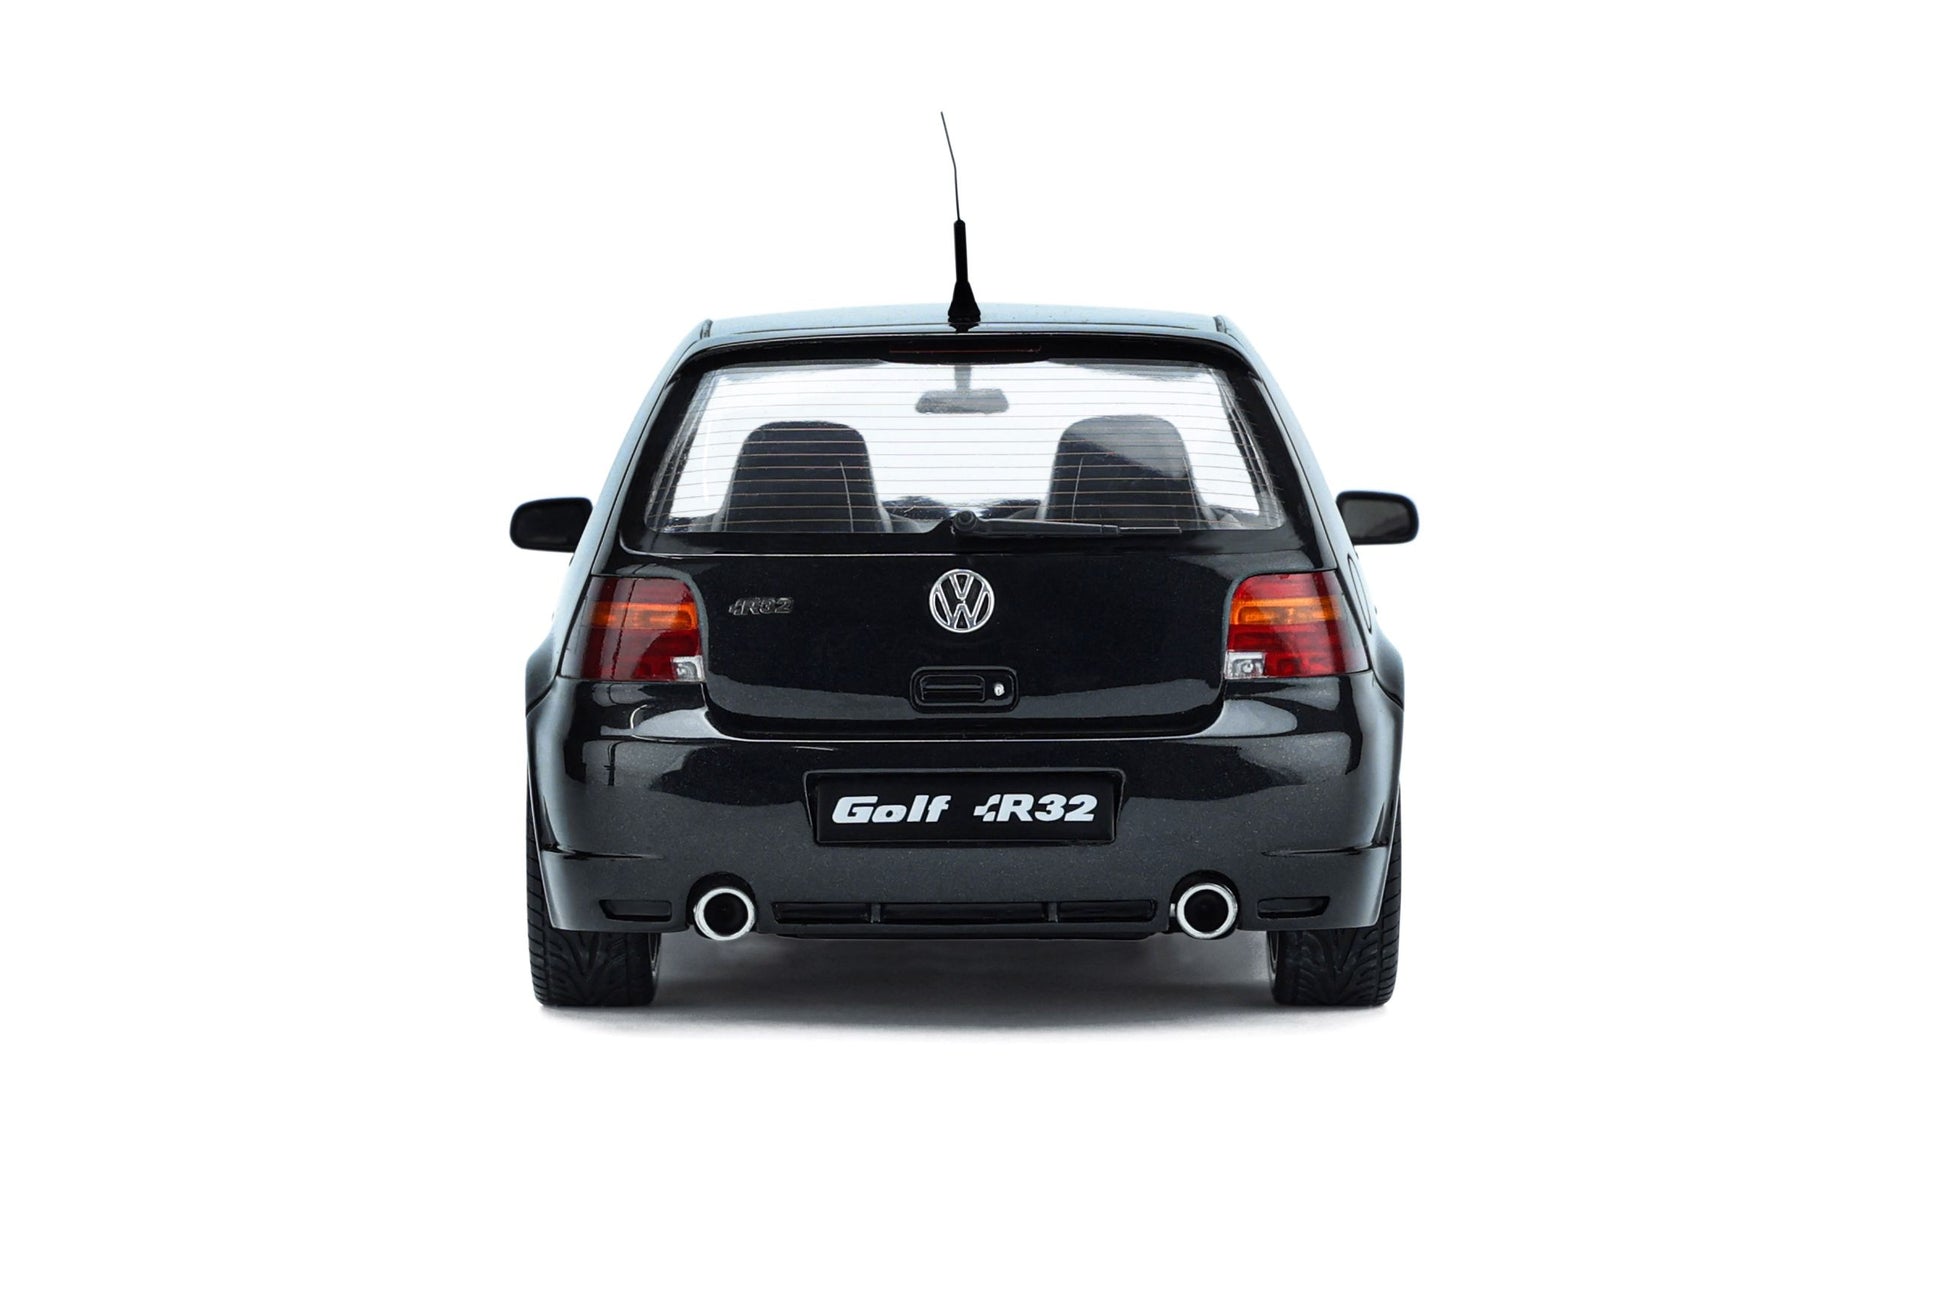 Time for golfing - VW Golf IV R32 from OttoMobile